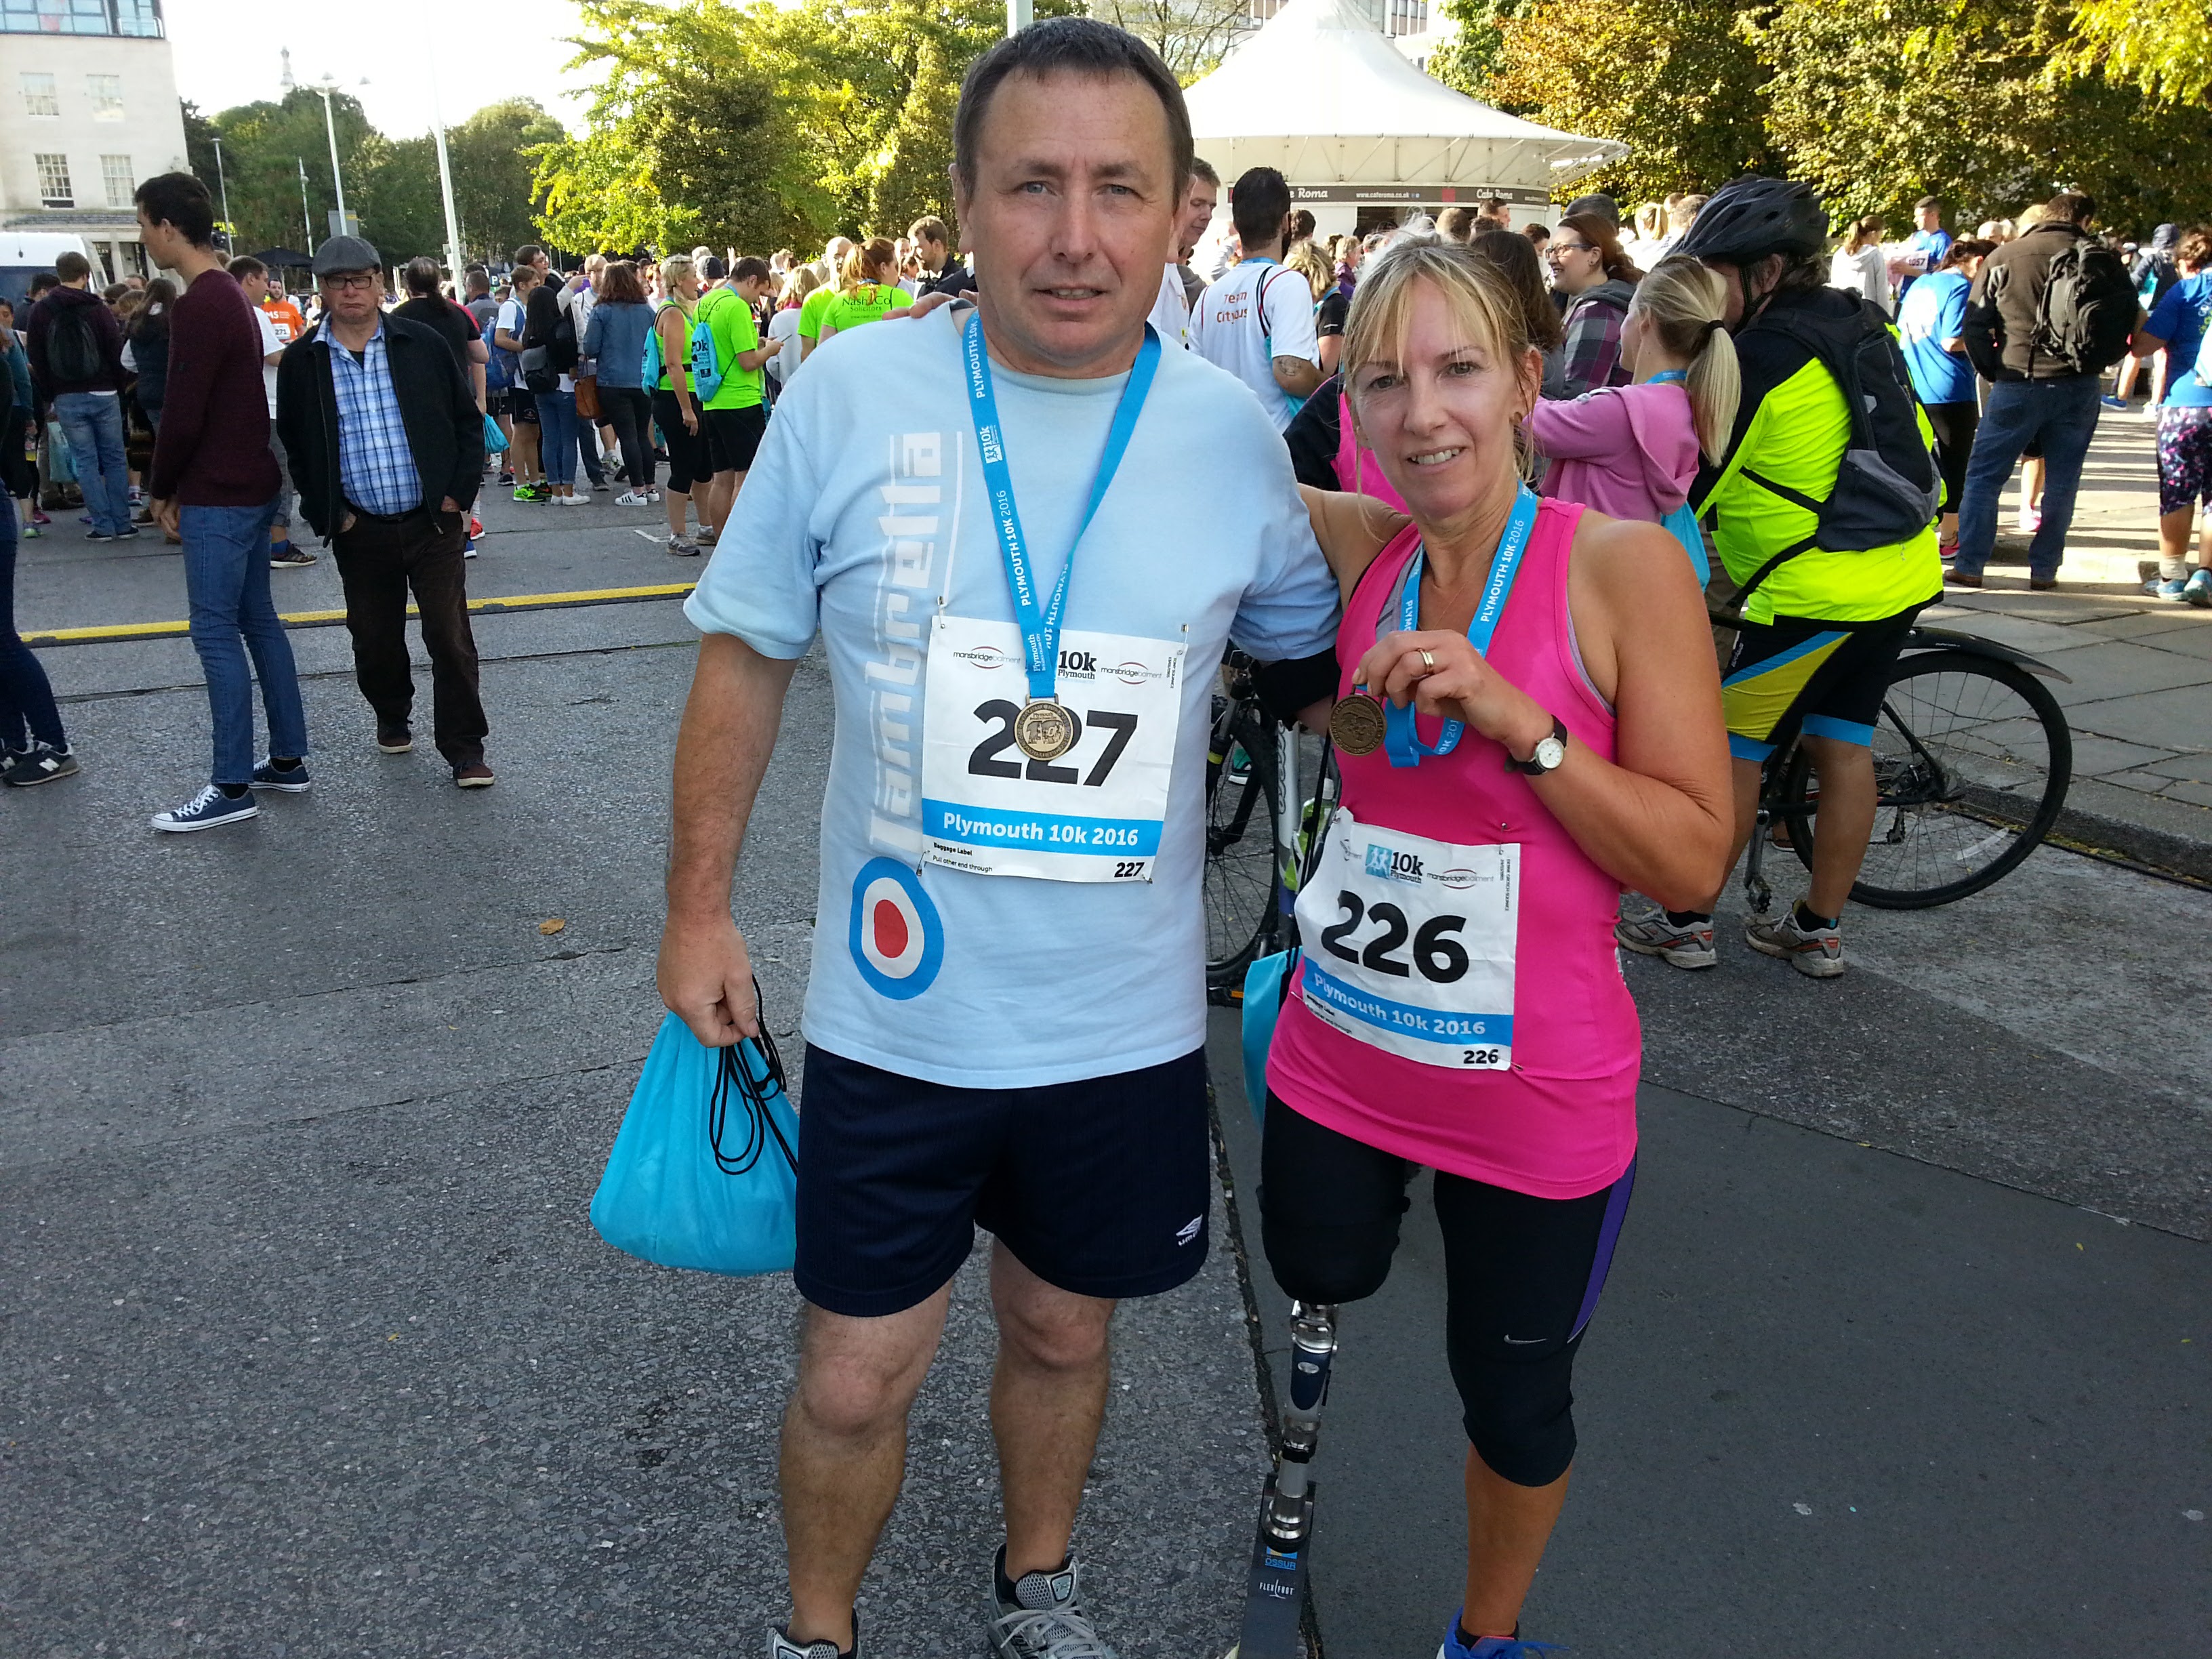 Debbie and her husband at the 2016 Plymouth 10k